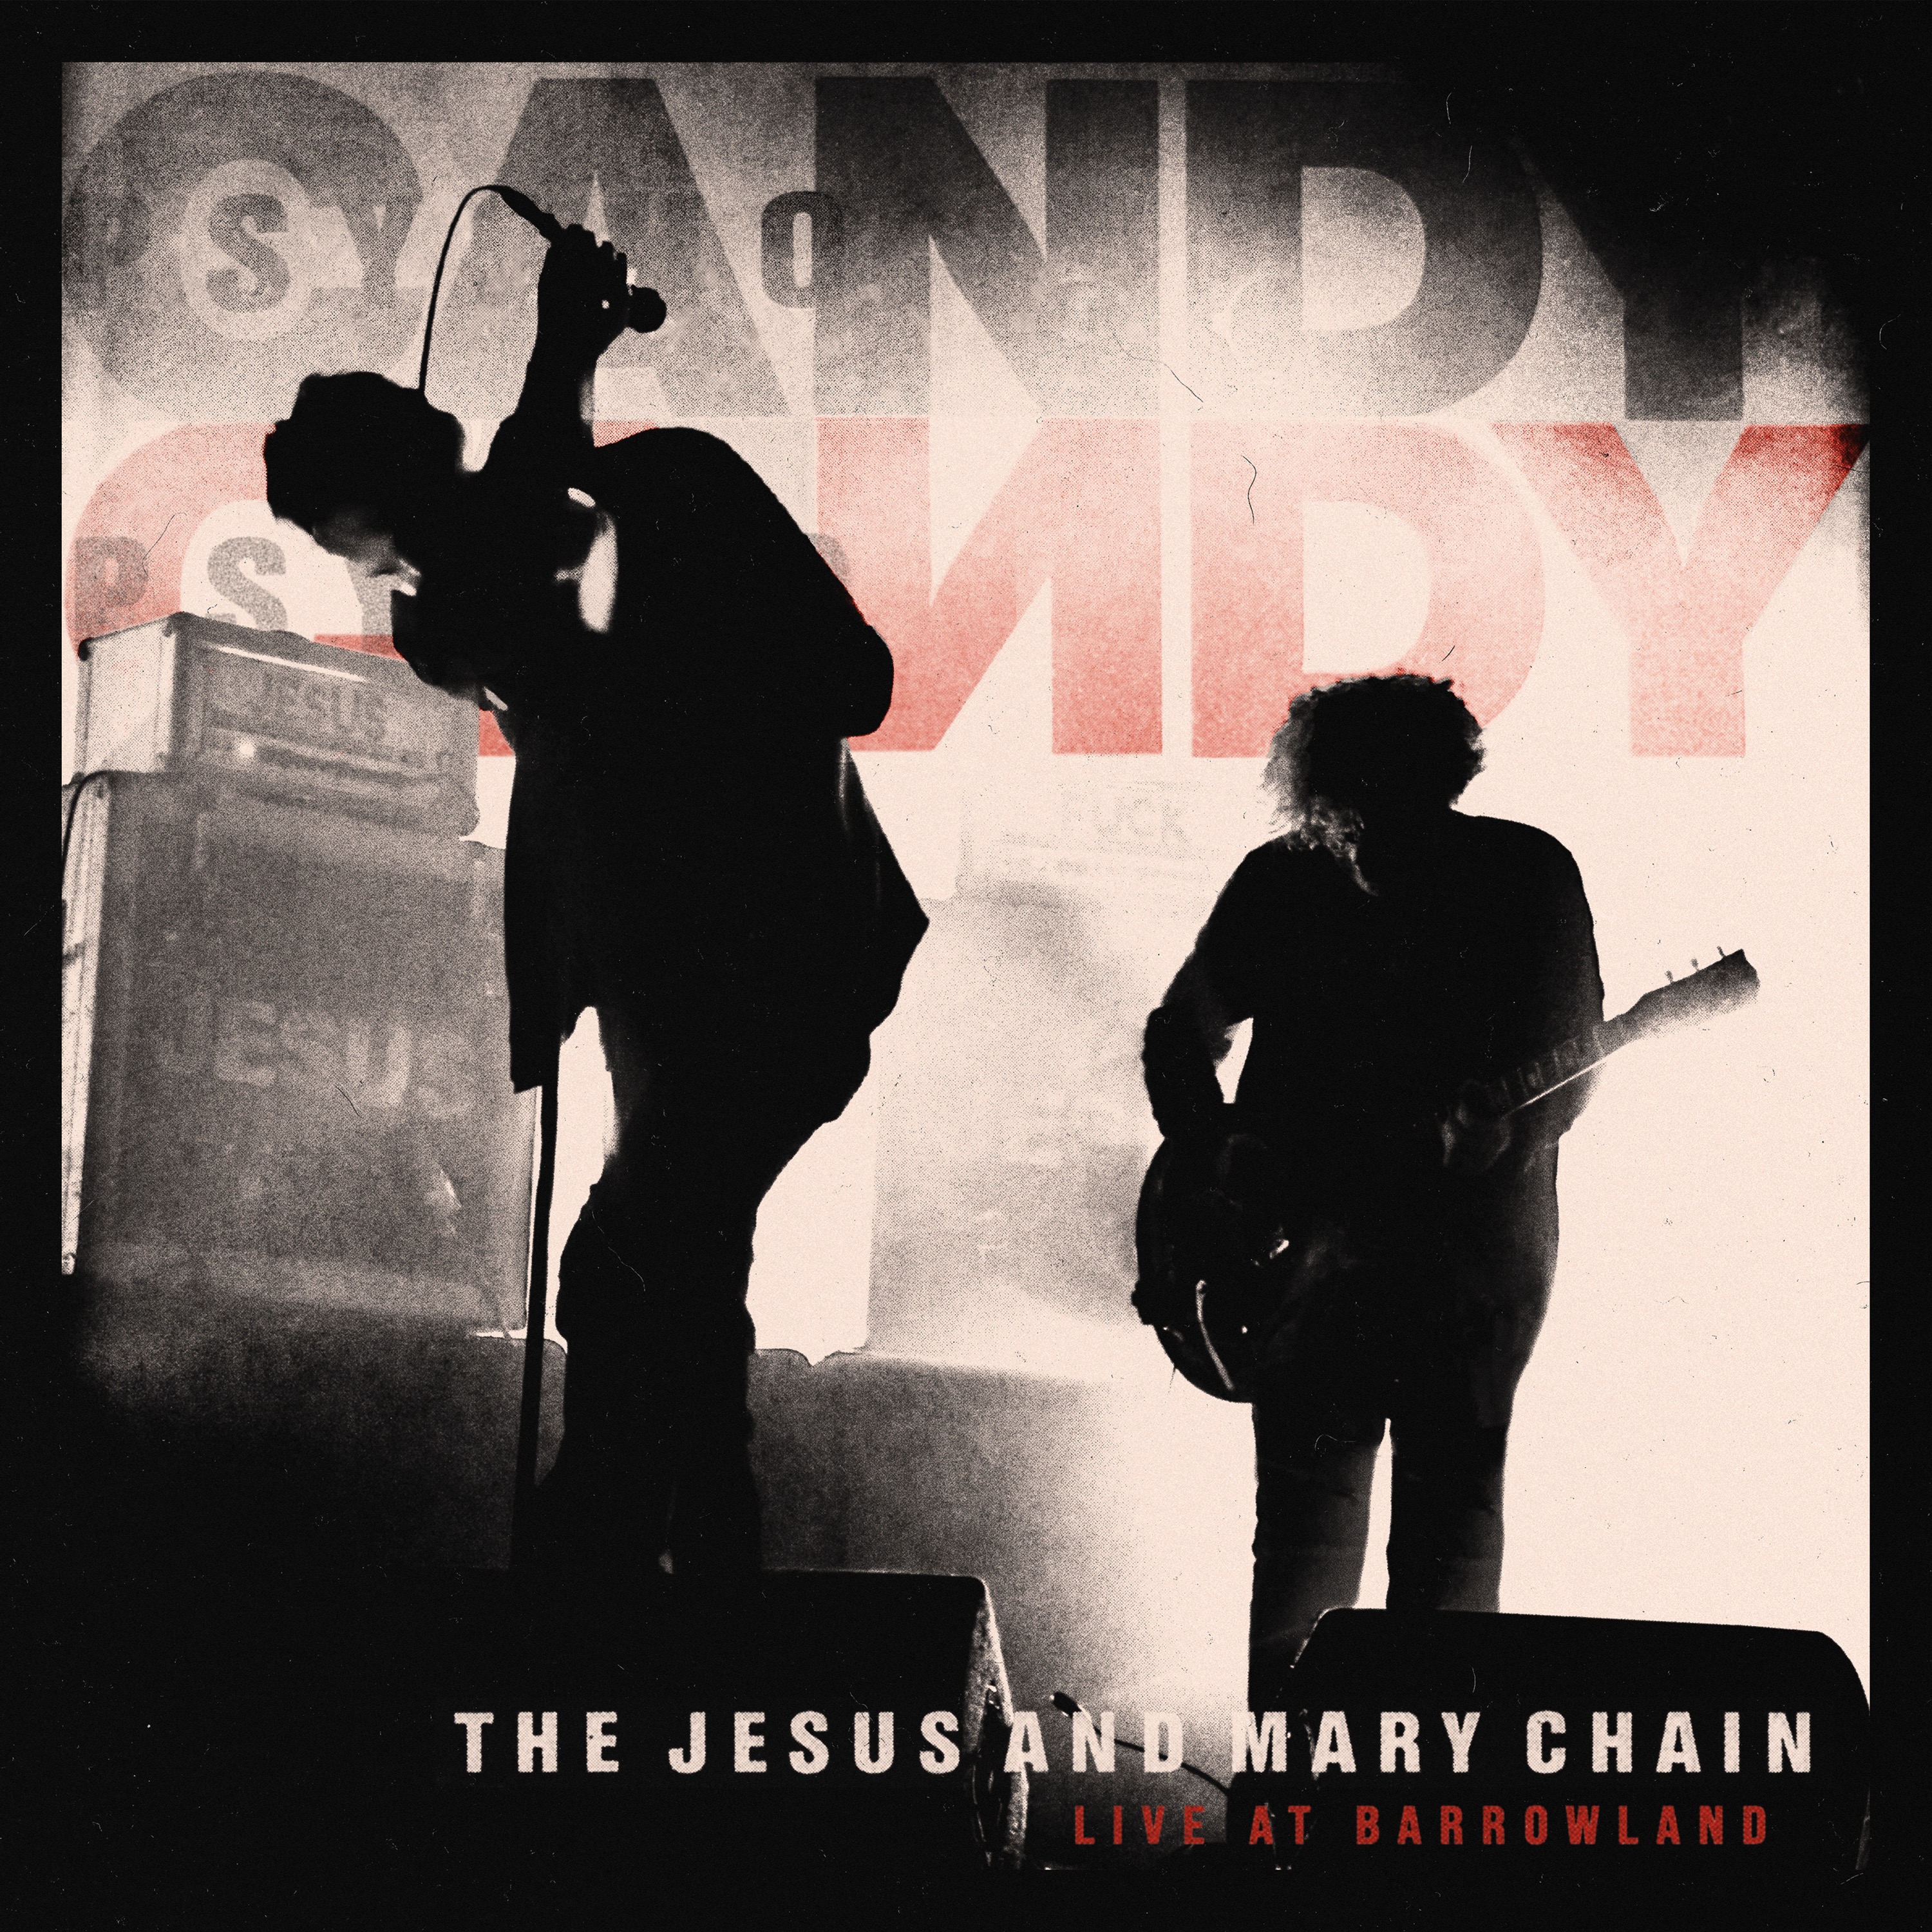 The Jesus and Mary Chain - Live at Barrowland - CD